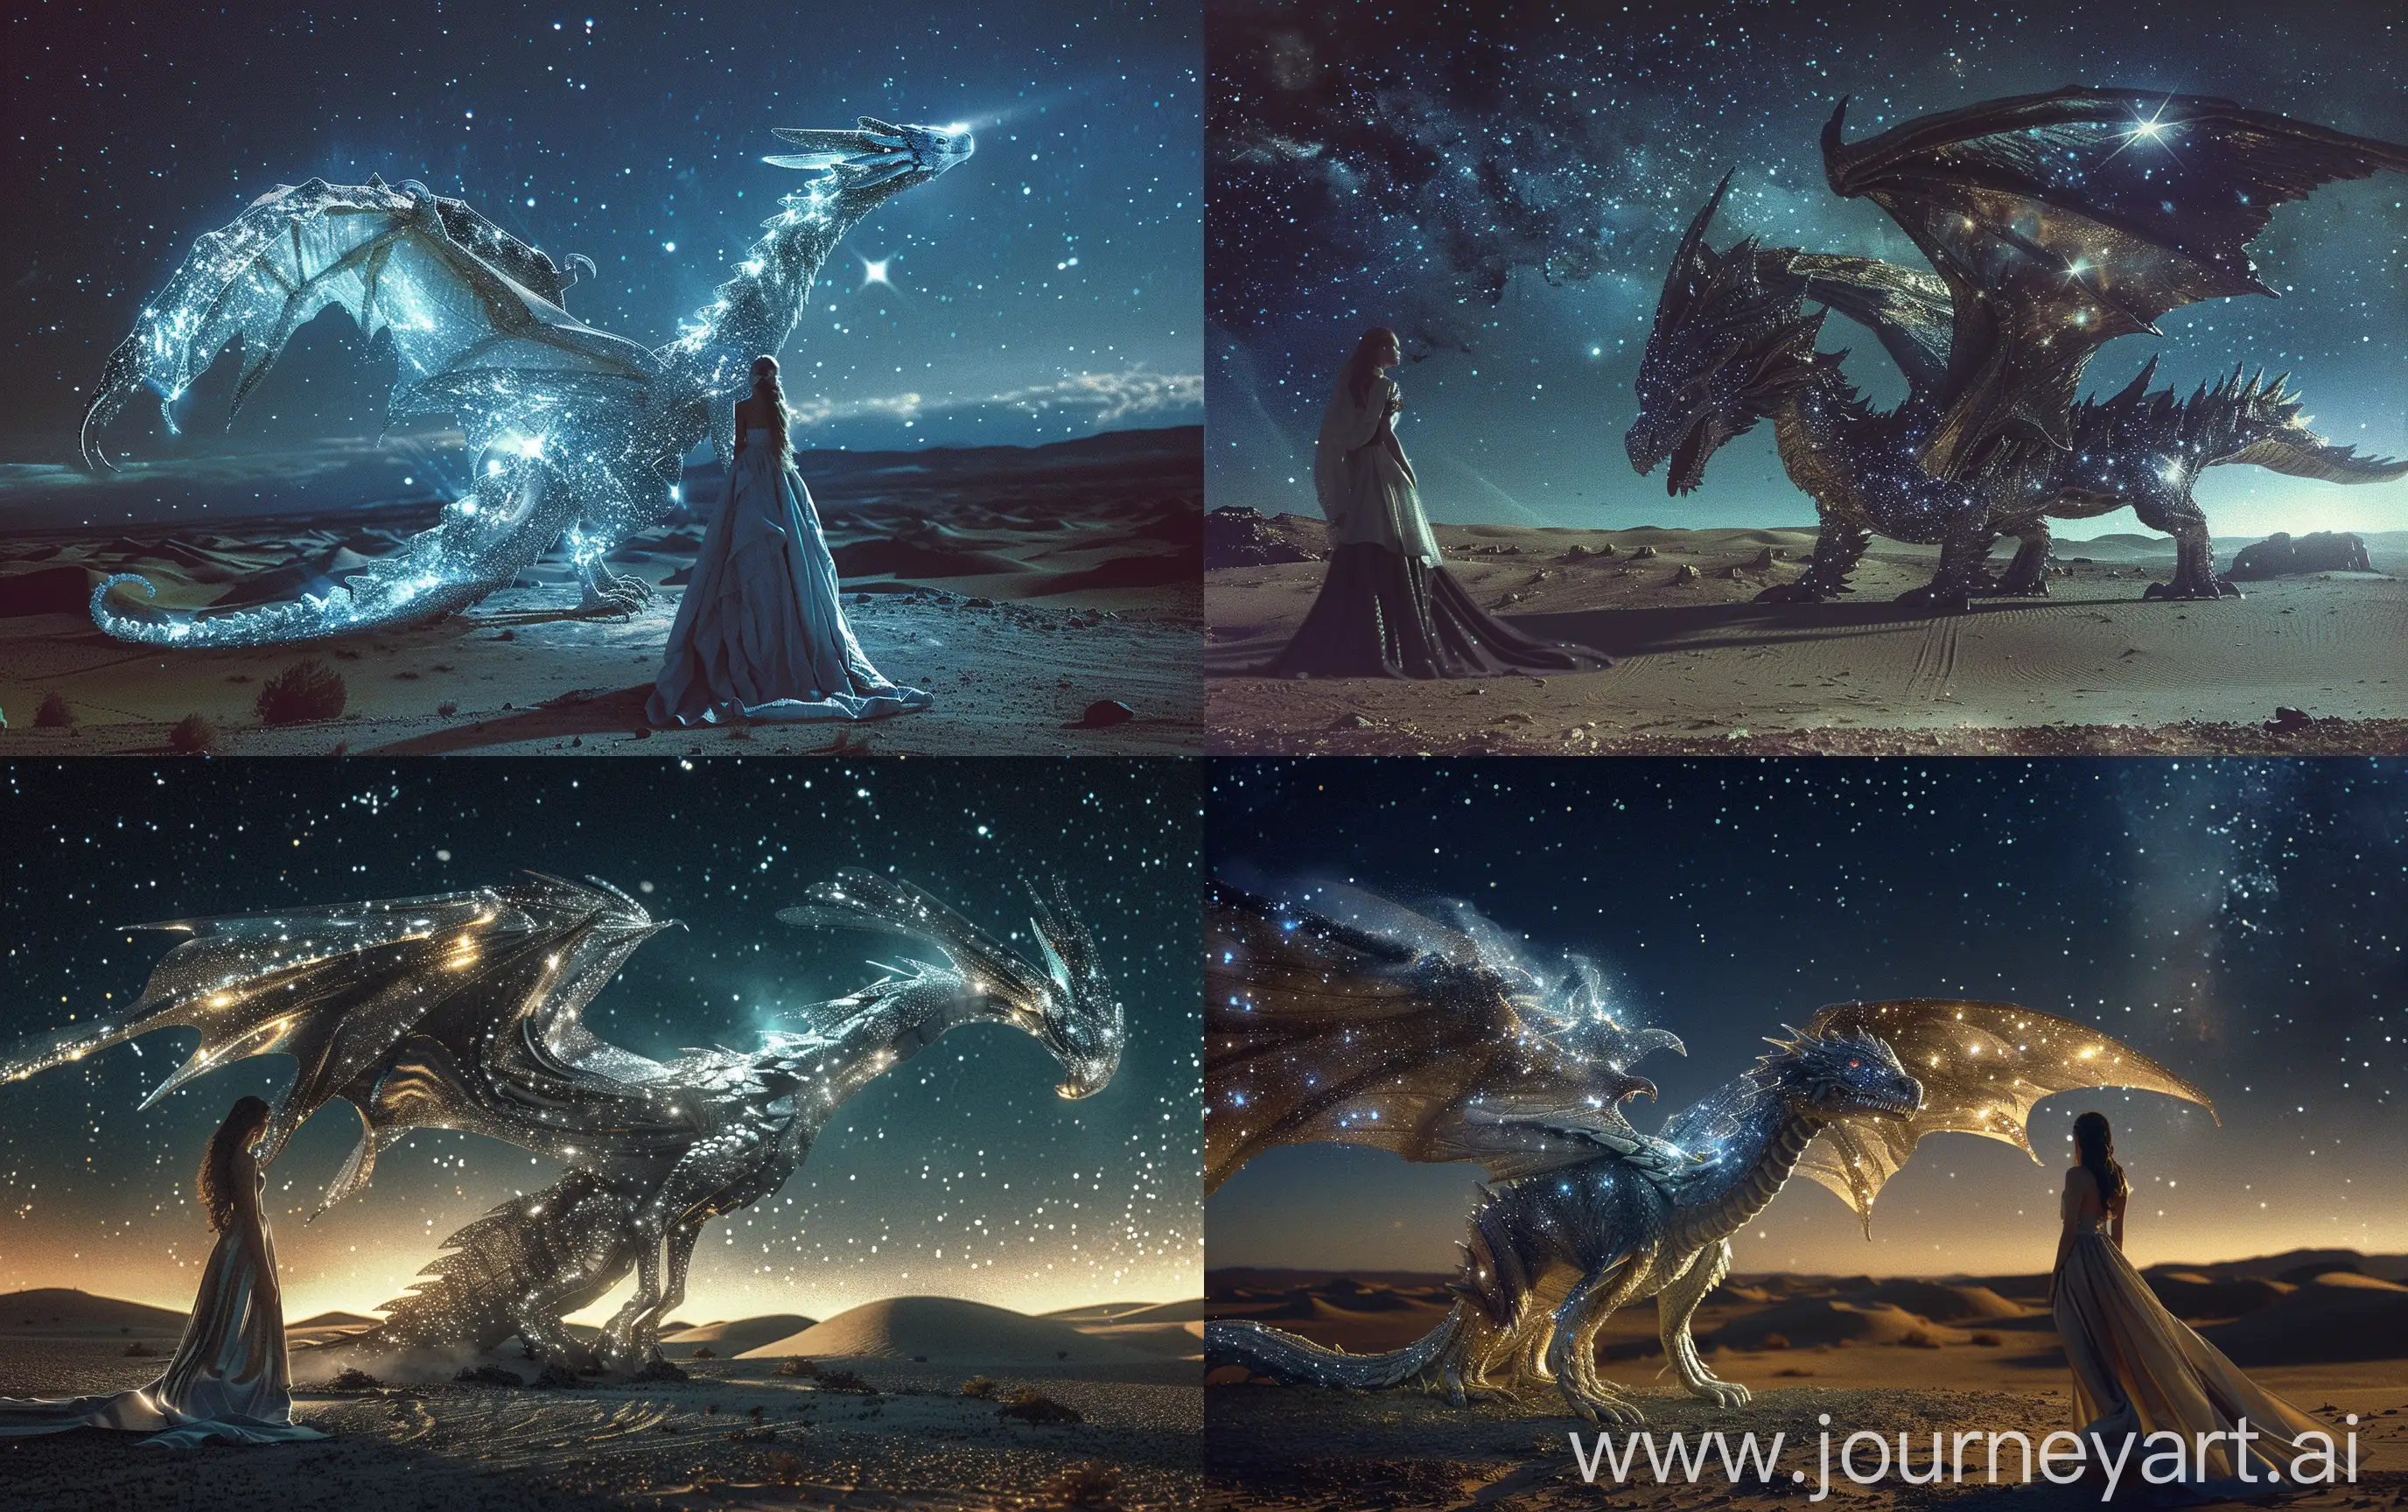 The big winged space dragon stands on ground, body is made of shining galaxies and stars, beautiful female in long dress looks at the dragon, the night dark desert with small hills, in the sky is deep space with bright nebulas, realistic, Kodak 35mm shot --ar 16:10